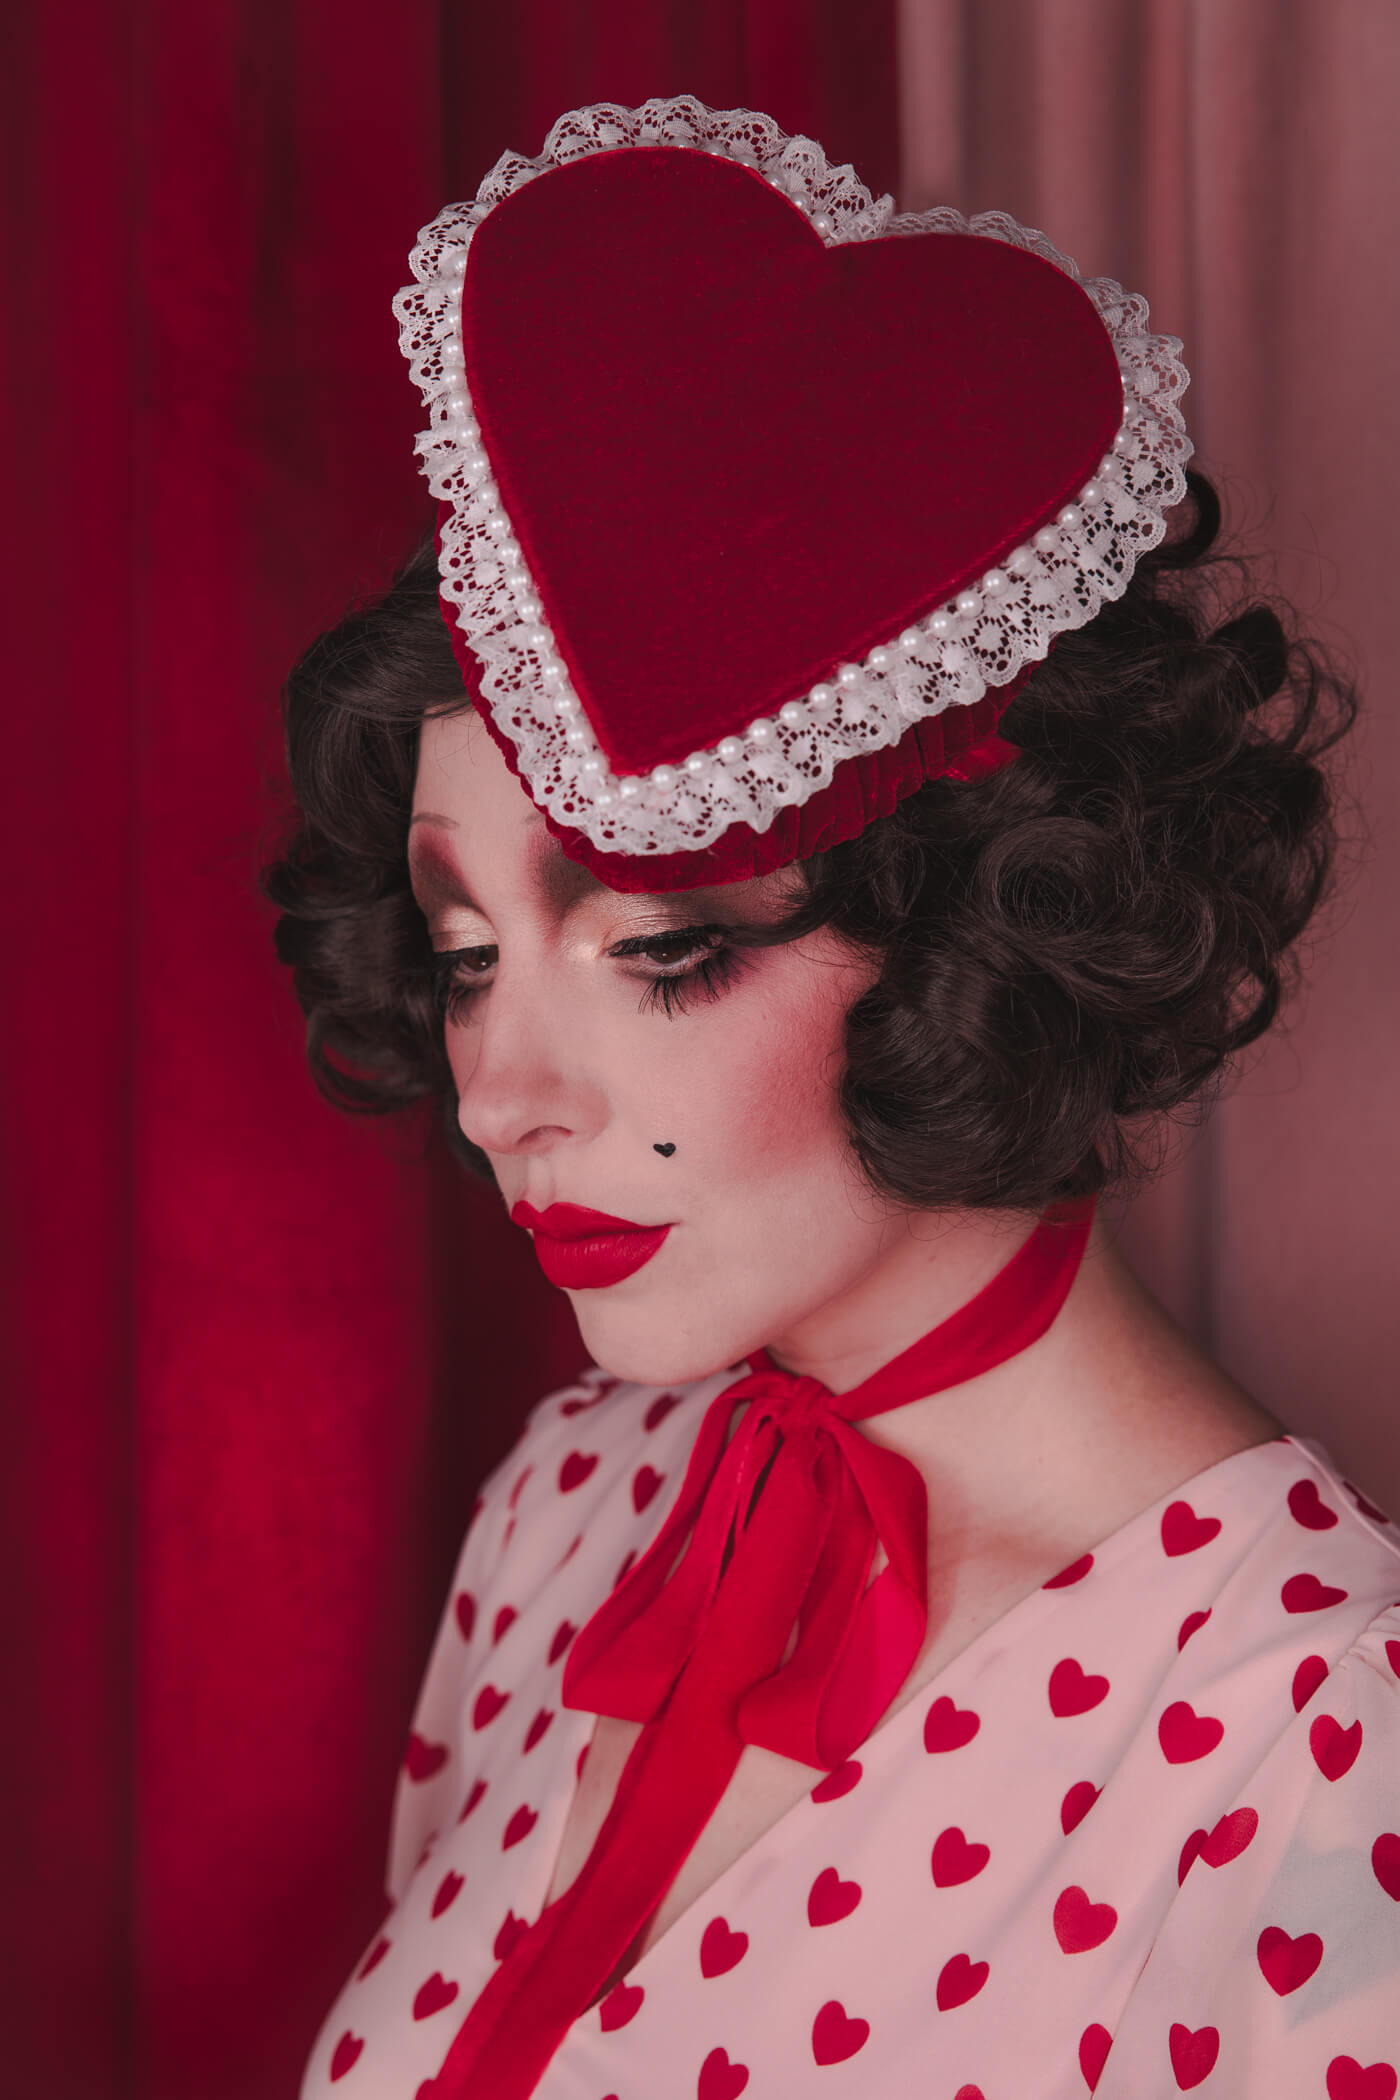 Pale girl with dark 20s 30s style hair and makeup, wearing a red velvet heart shaped box hat